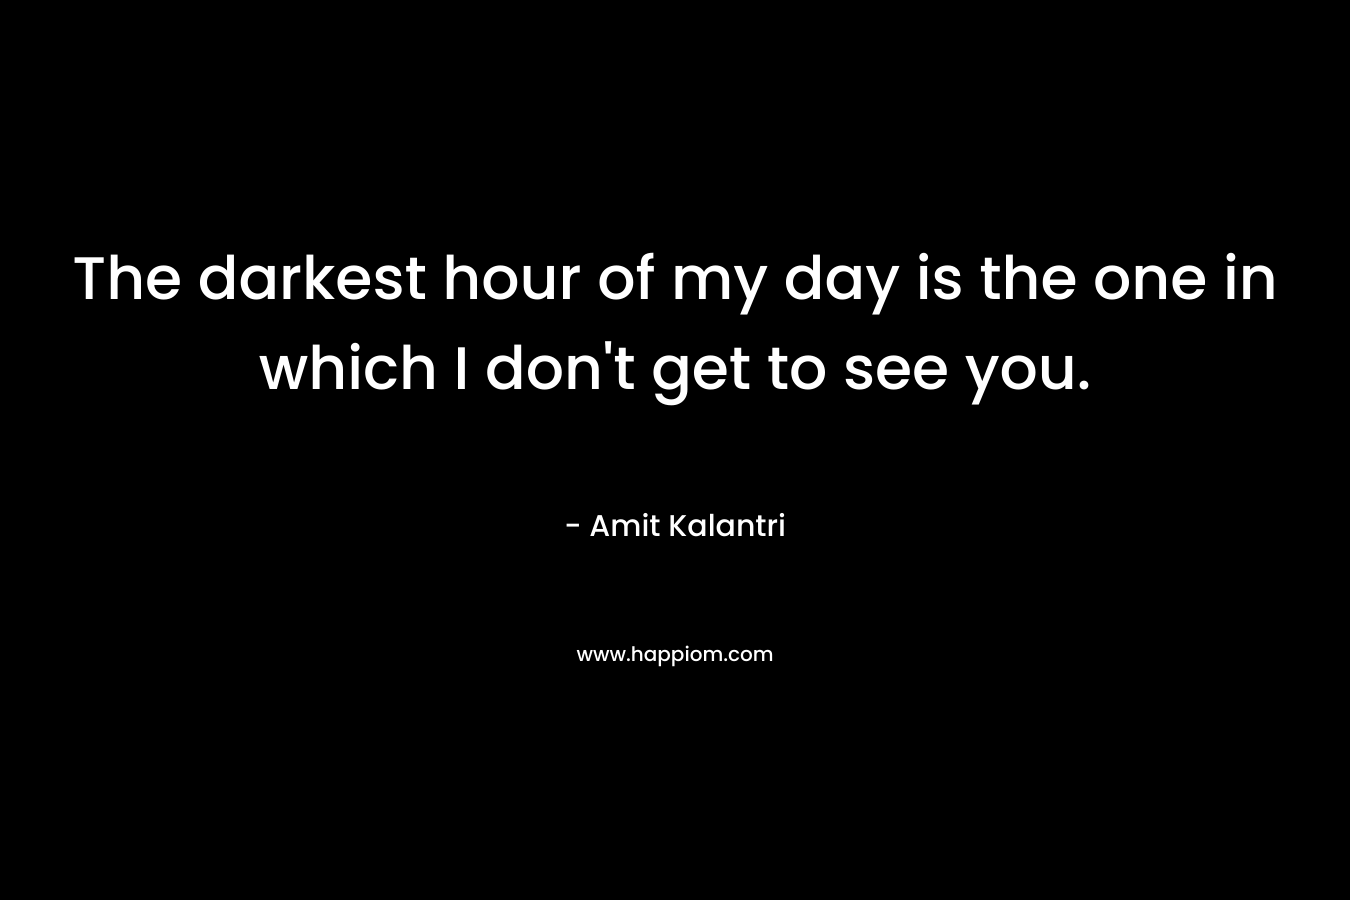 The darkest hour of my day is the one in which I don't get to see you.